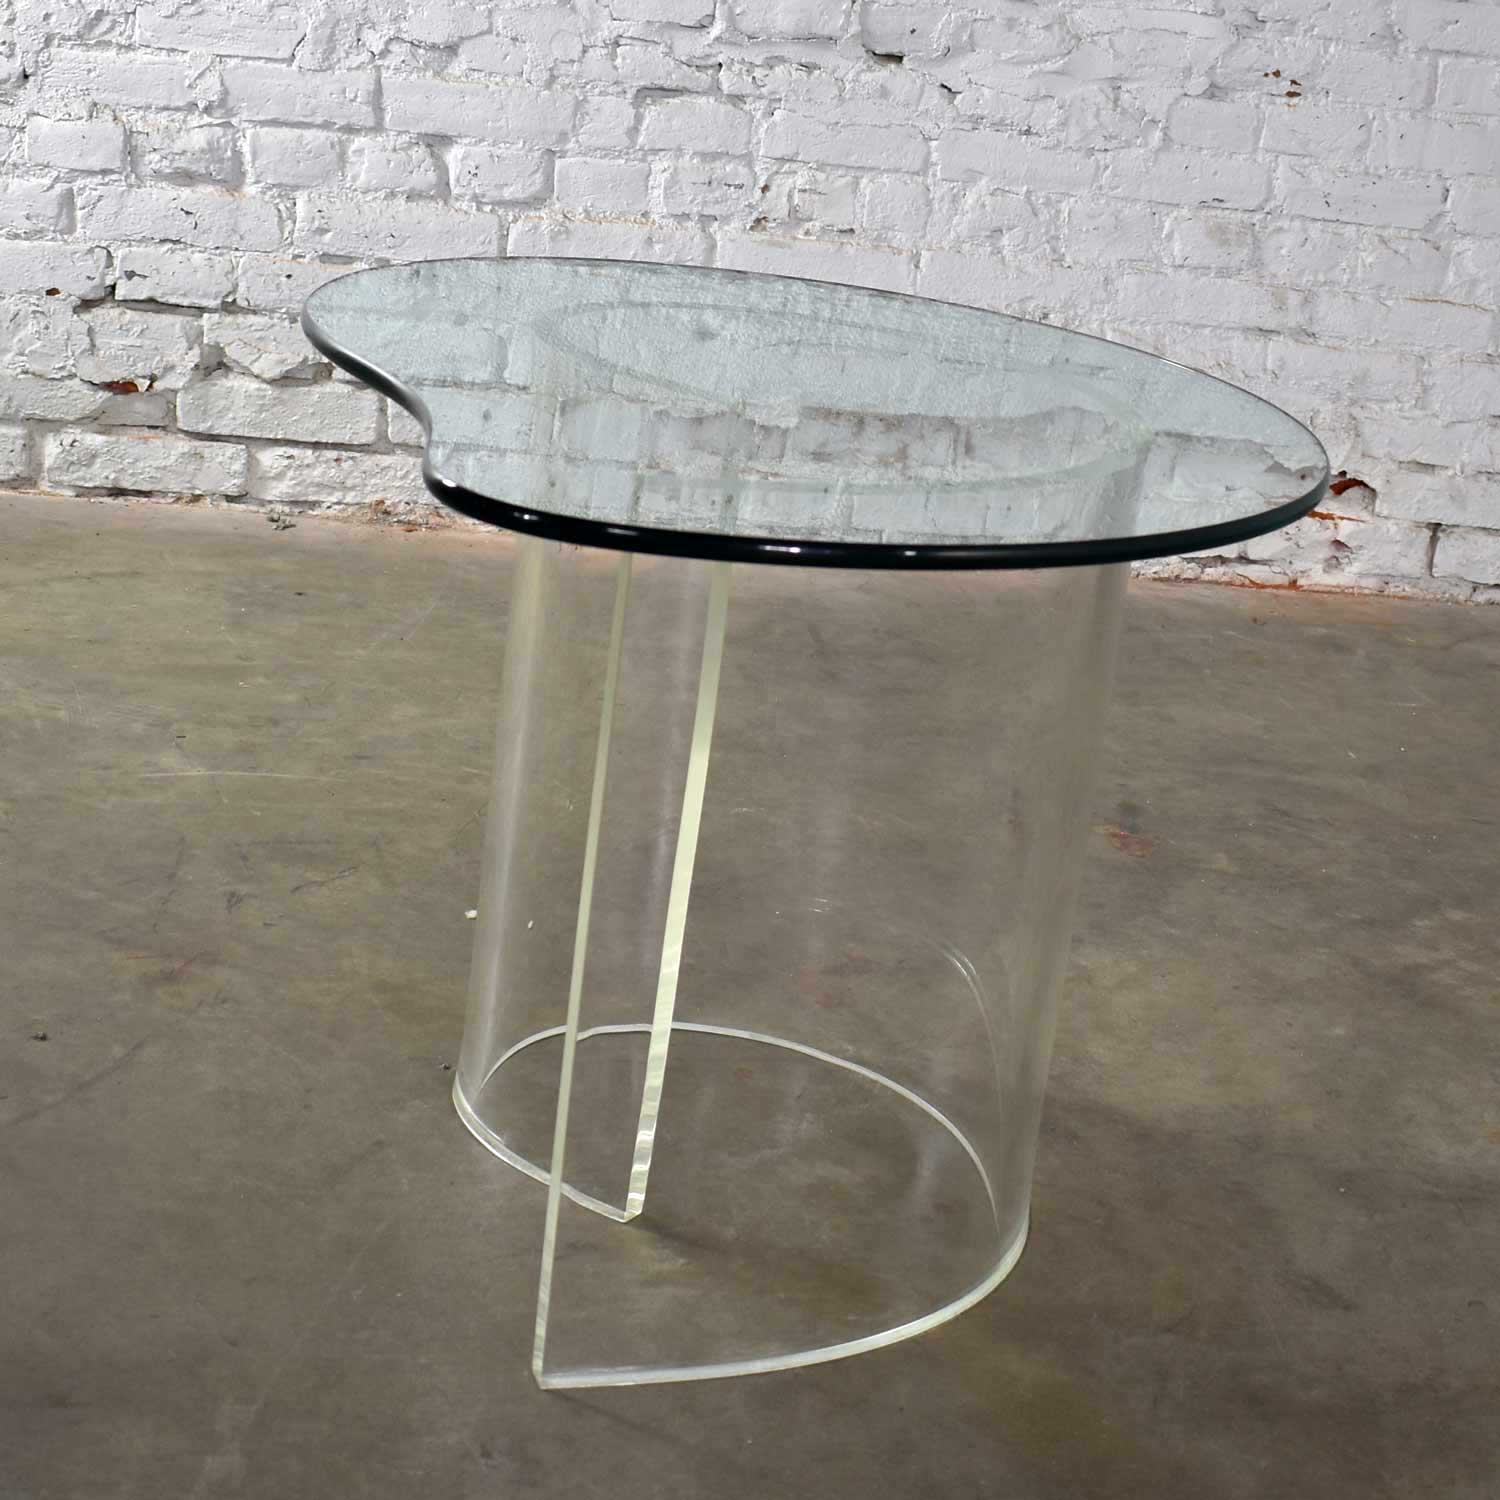 Vintage Hollywood Regency Lucite Snail or Spiral End Table with Kidney Shaped Glass Top